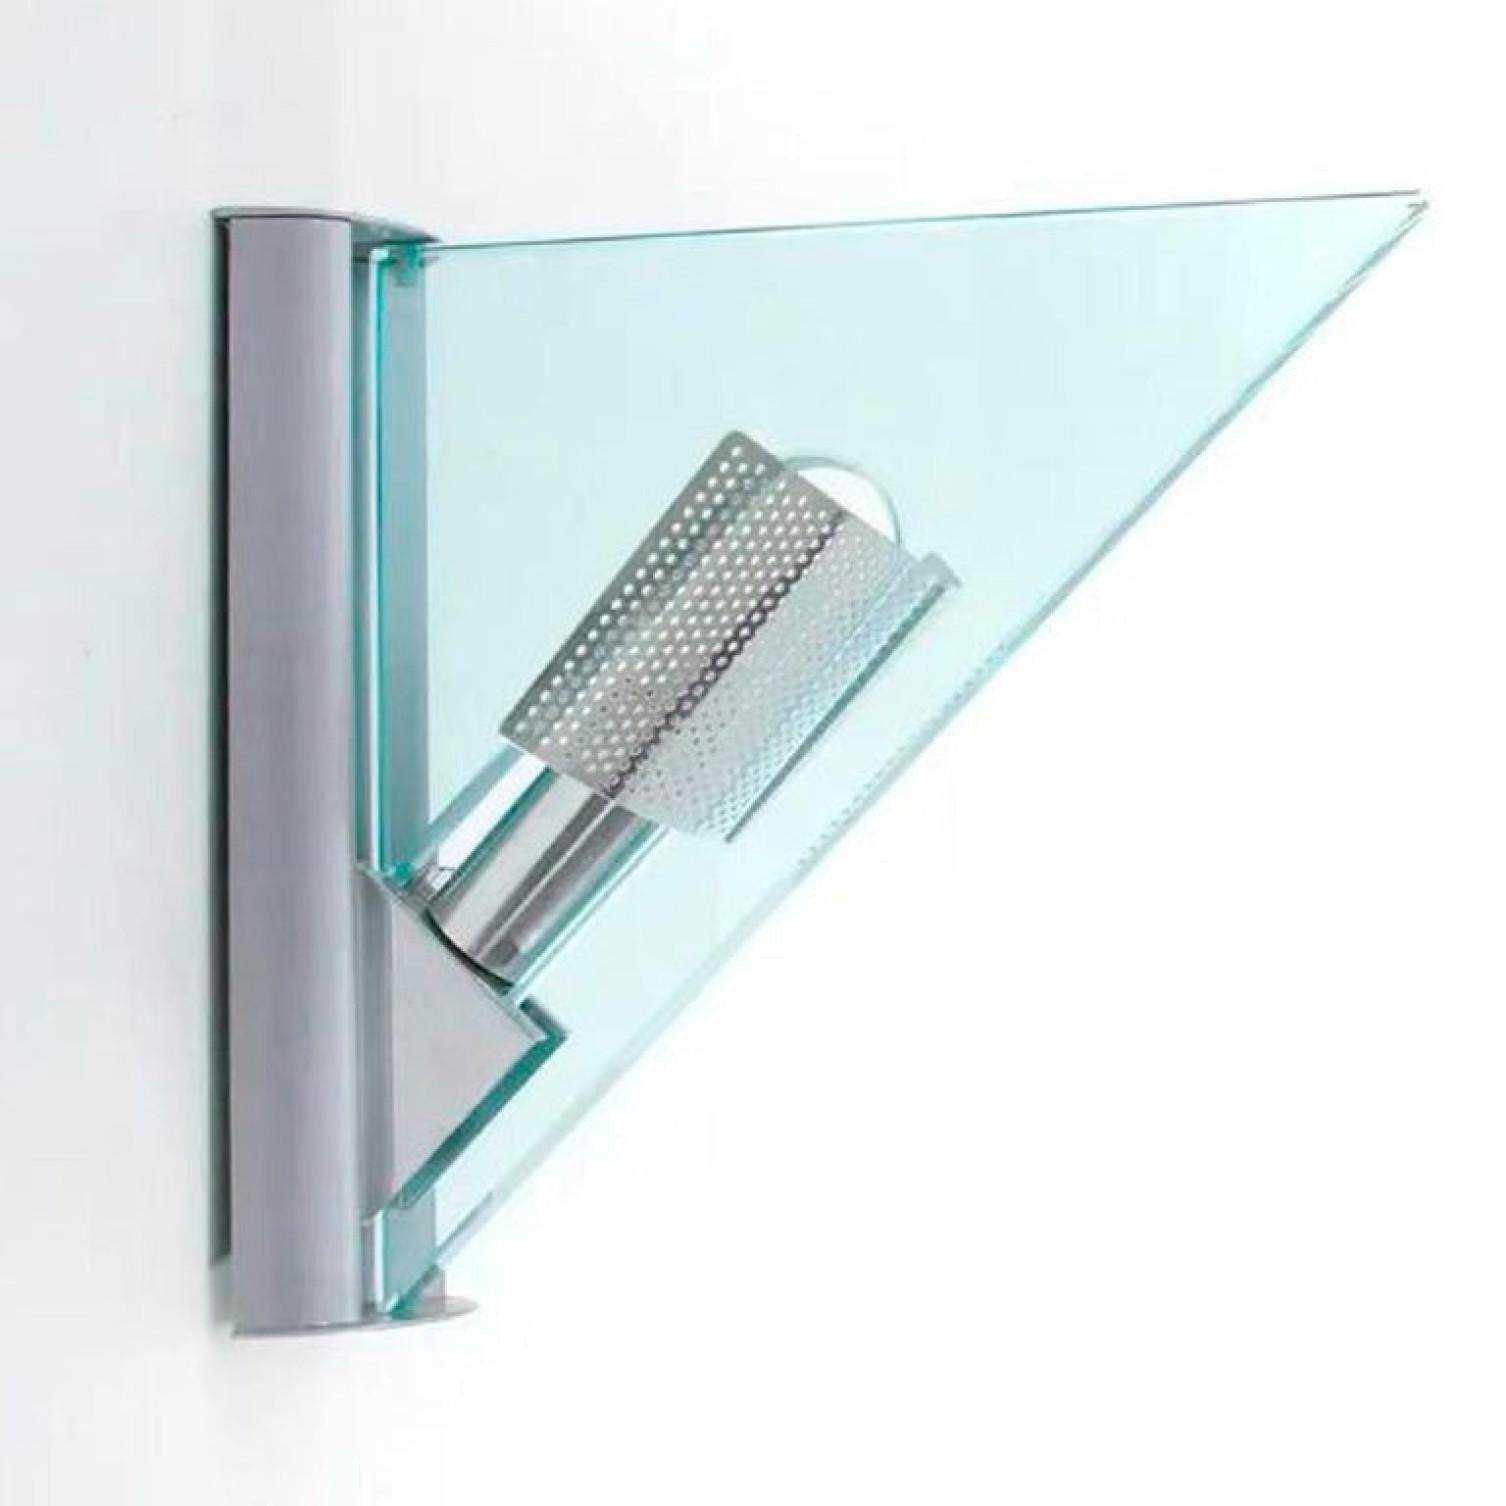 One of the Ten Glass Aluminium Triangle Shaped Wall Lights, Artemide, 1984 For Sale 3